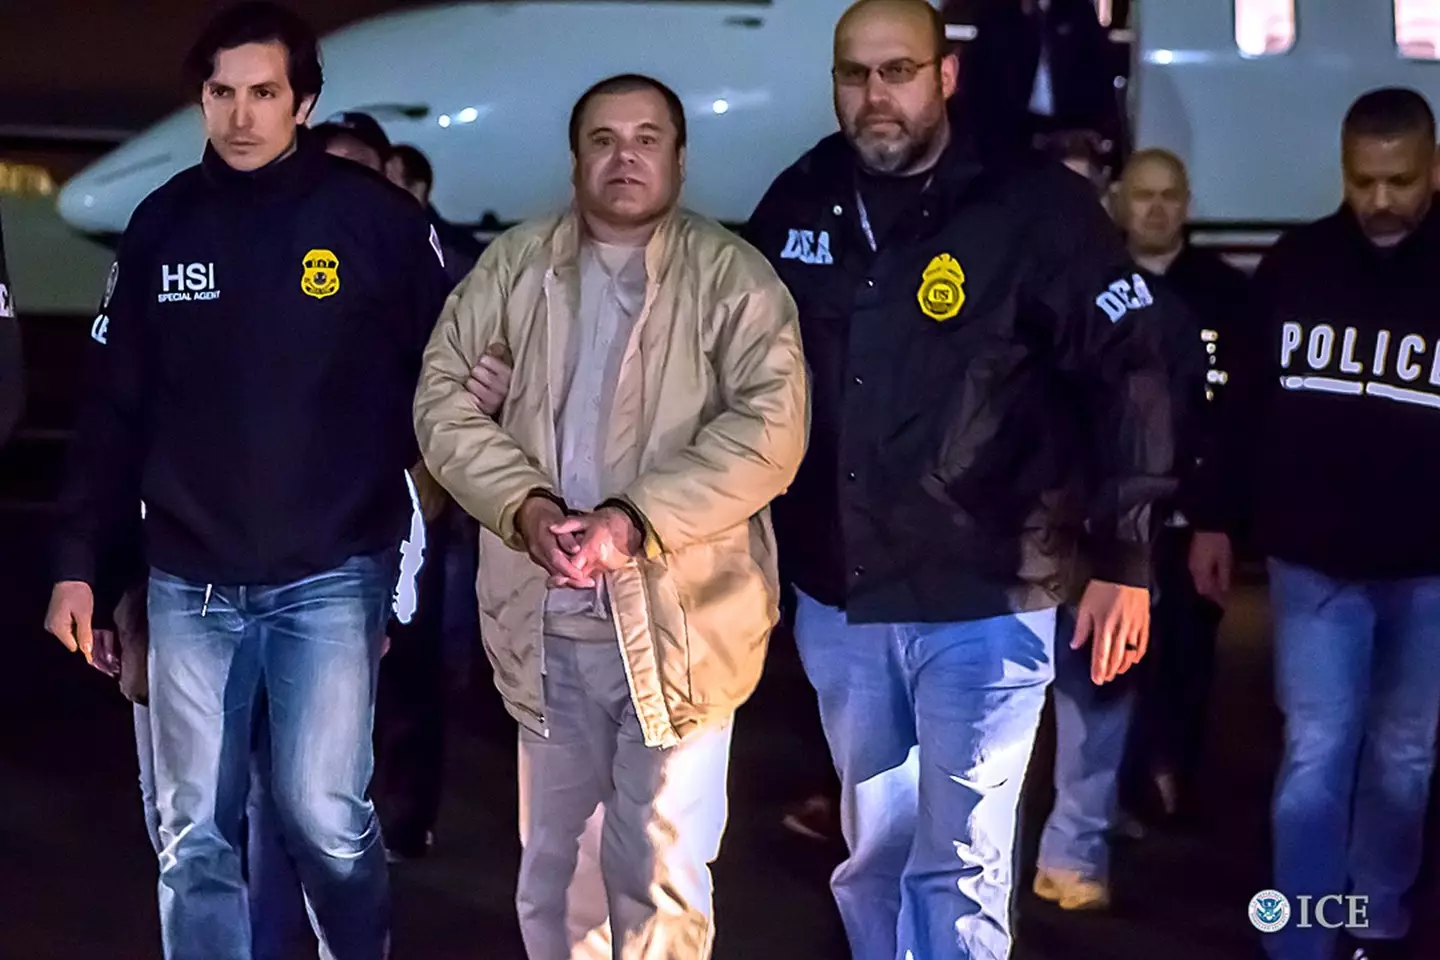 El Chapo spent 13 years on the run before being sentenced.